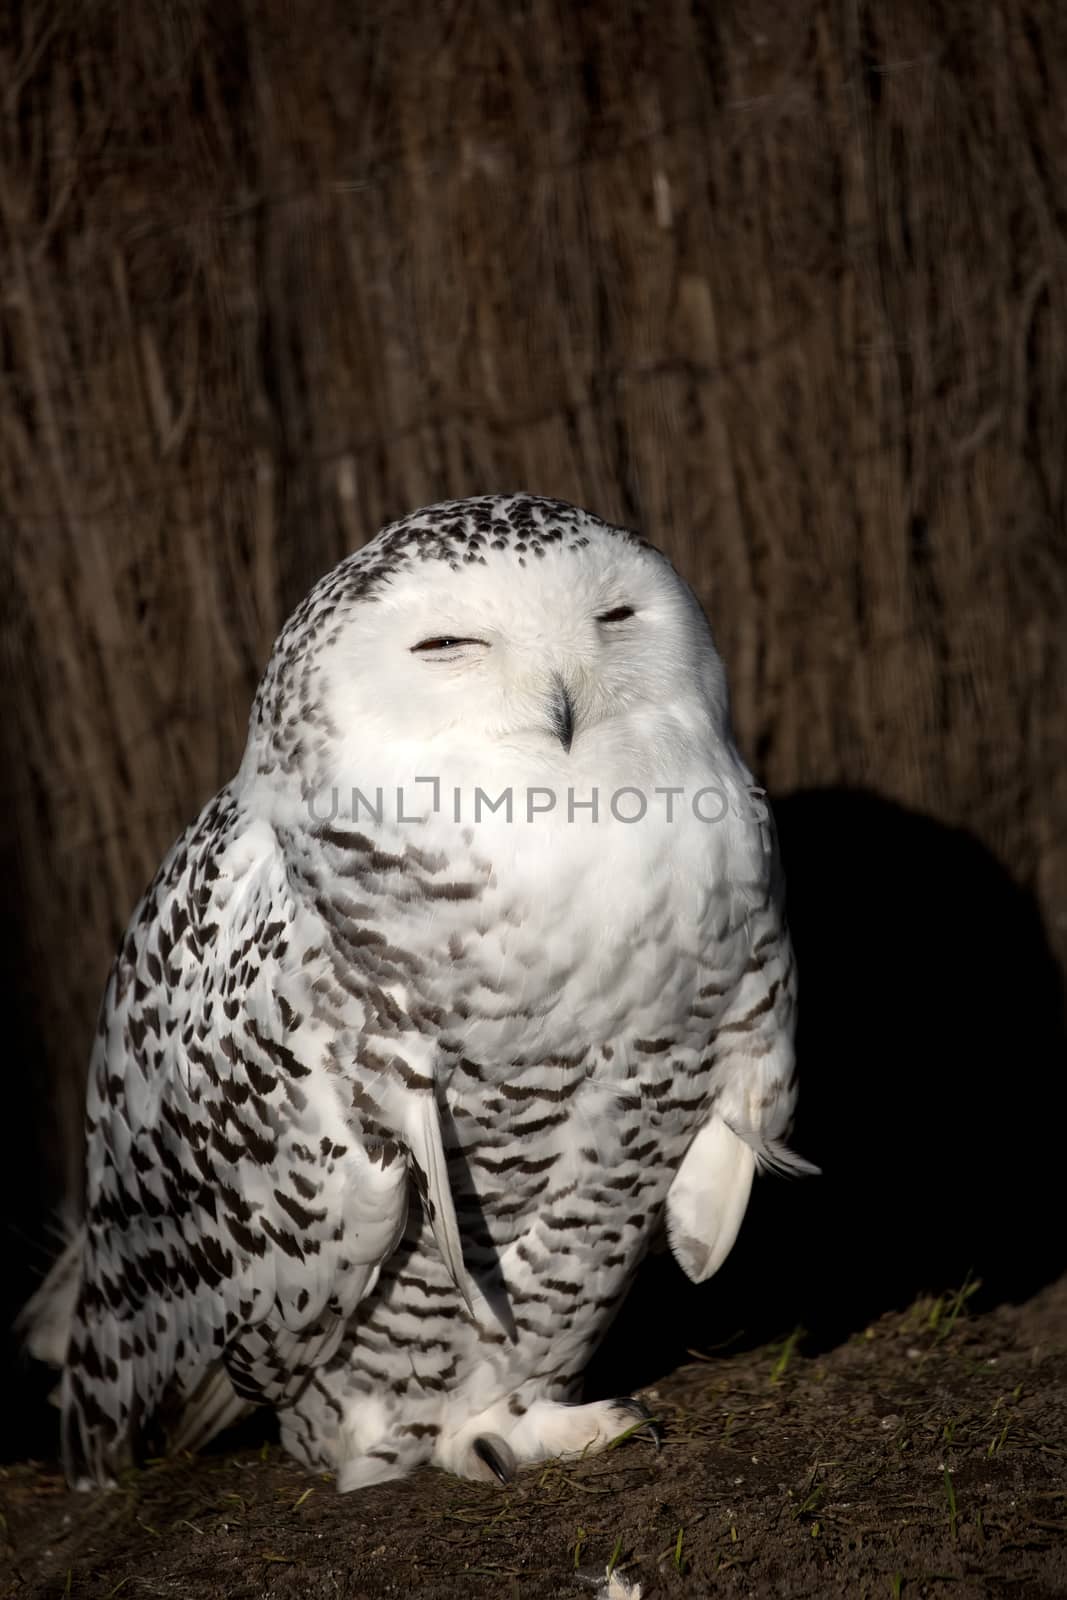 Snowy Owl in the wild in the forest